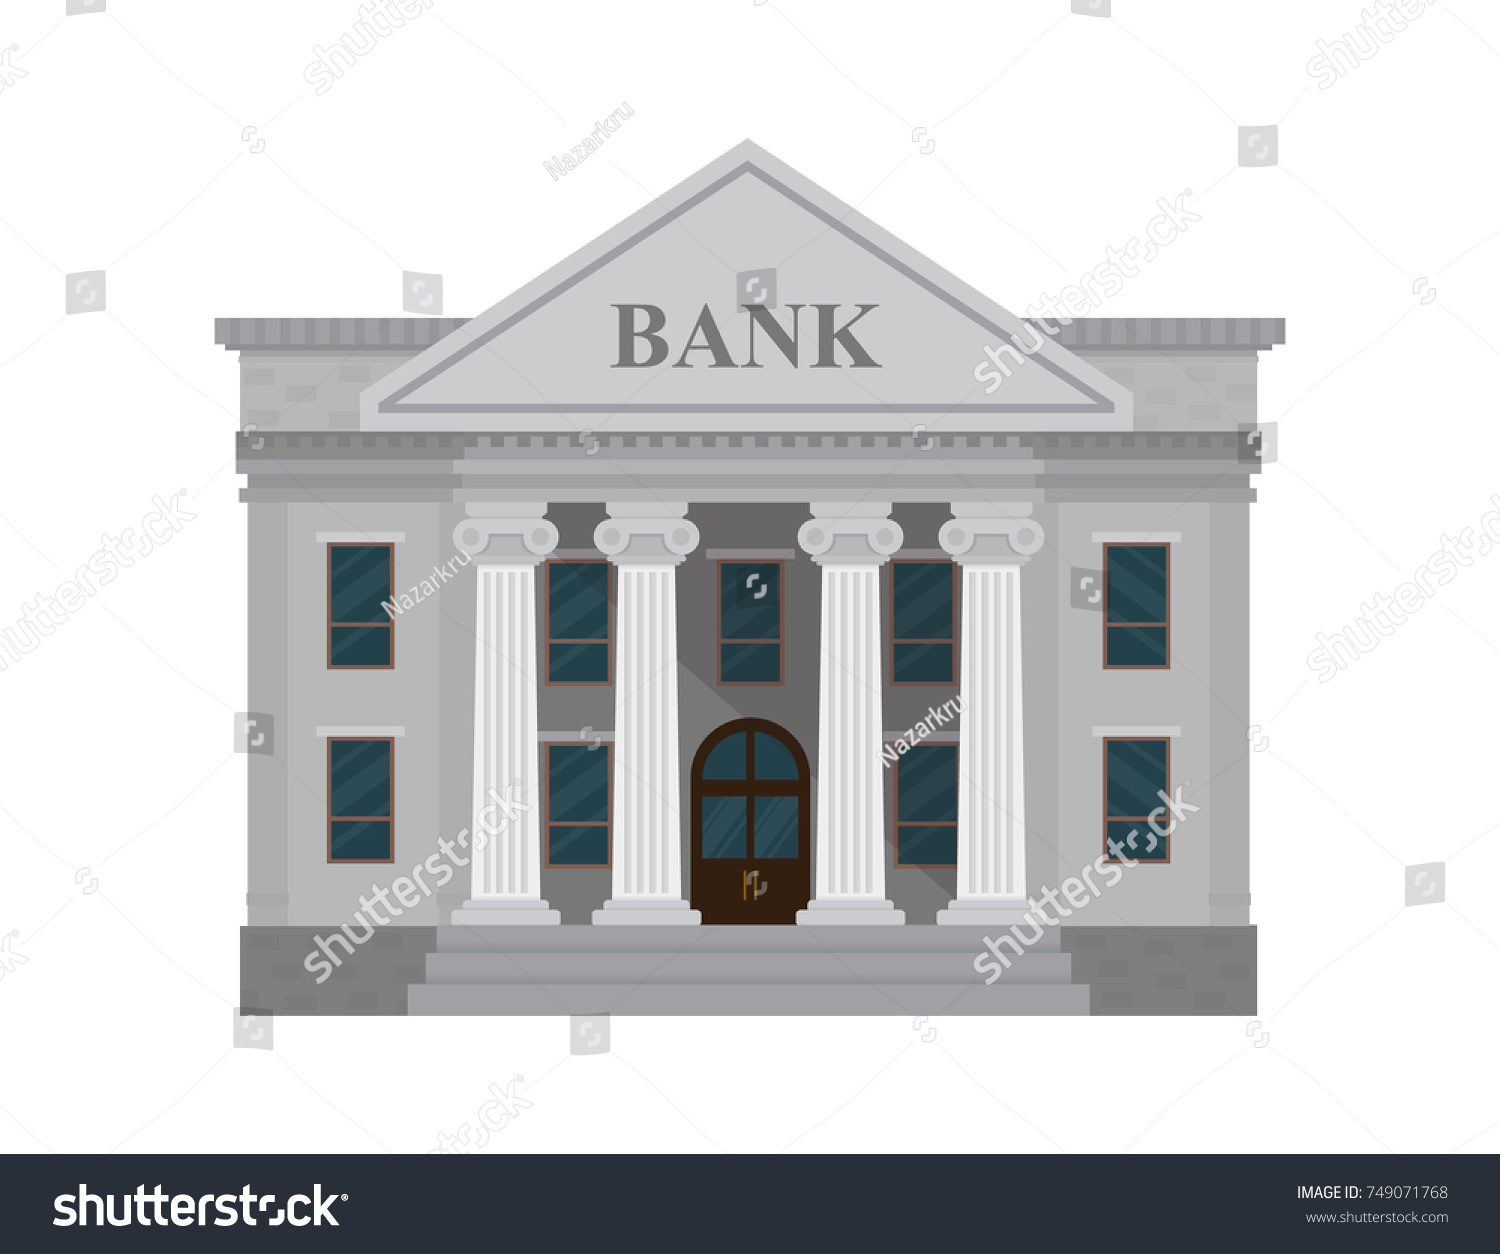 Bank building isolated on white background. Vector illustration. Flat style. #749071768